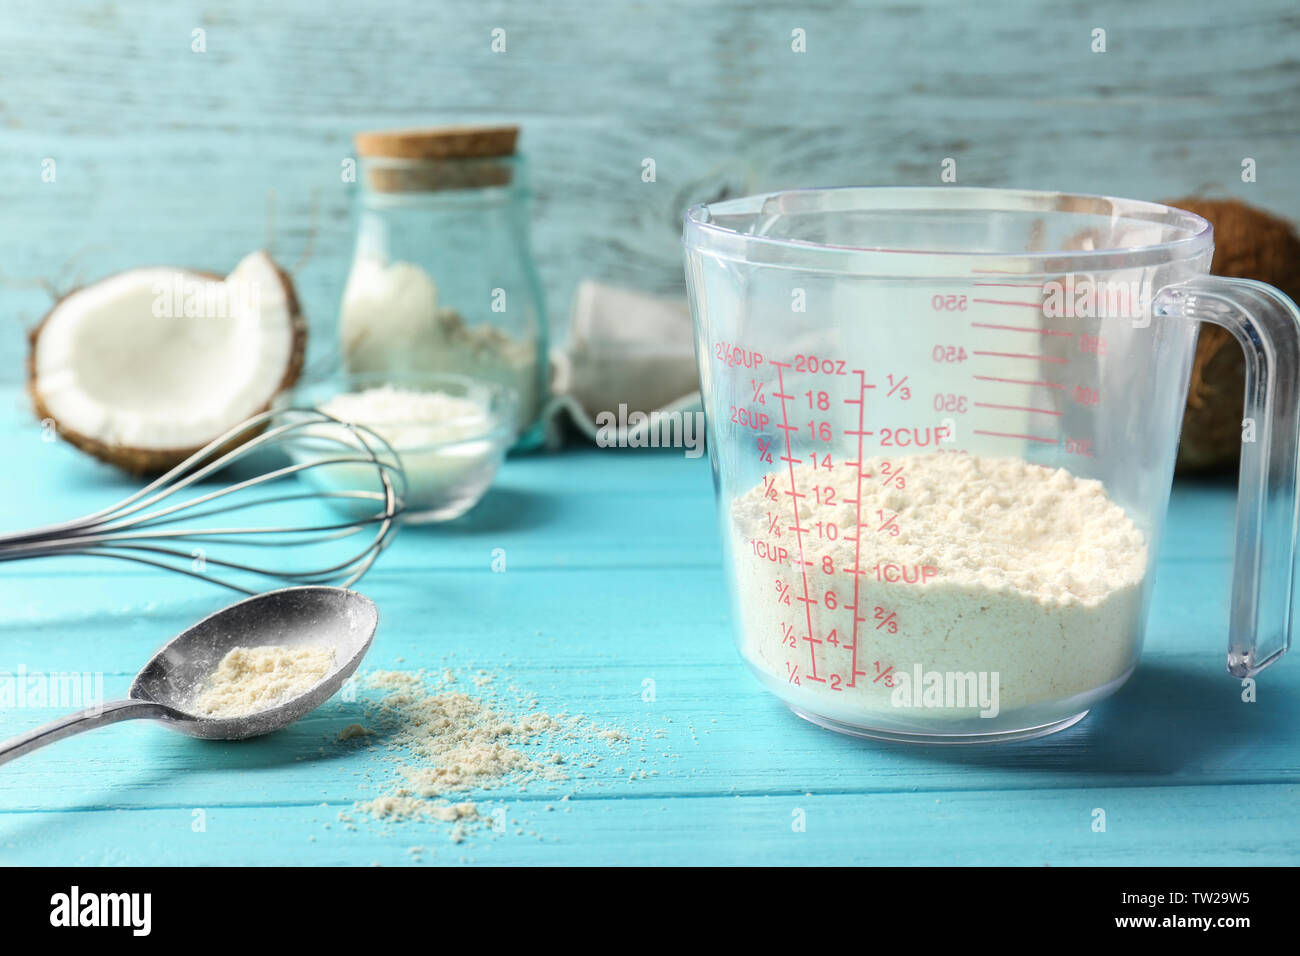 https://c8.alamy.com/comp/TW29W5/measuring-cup-with-coconut-flour-on-wooden-background-TW29W5.jpg